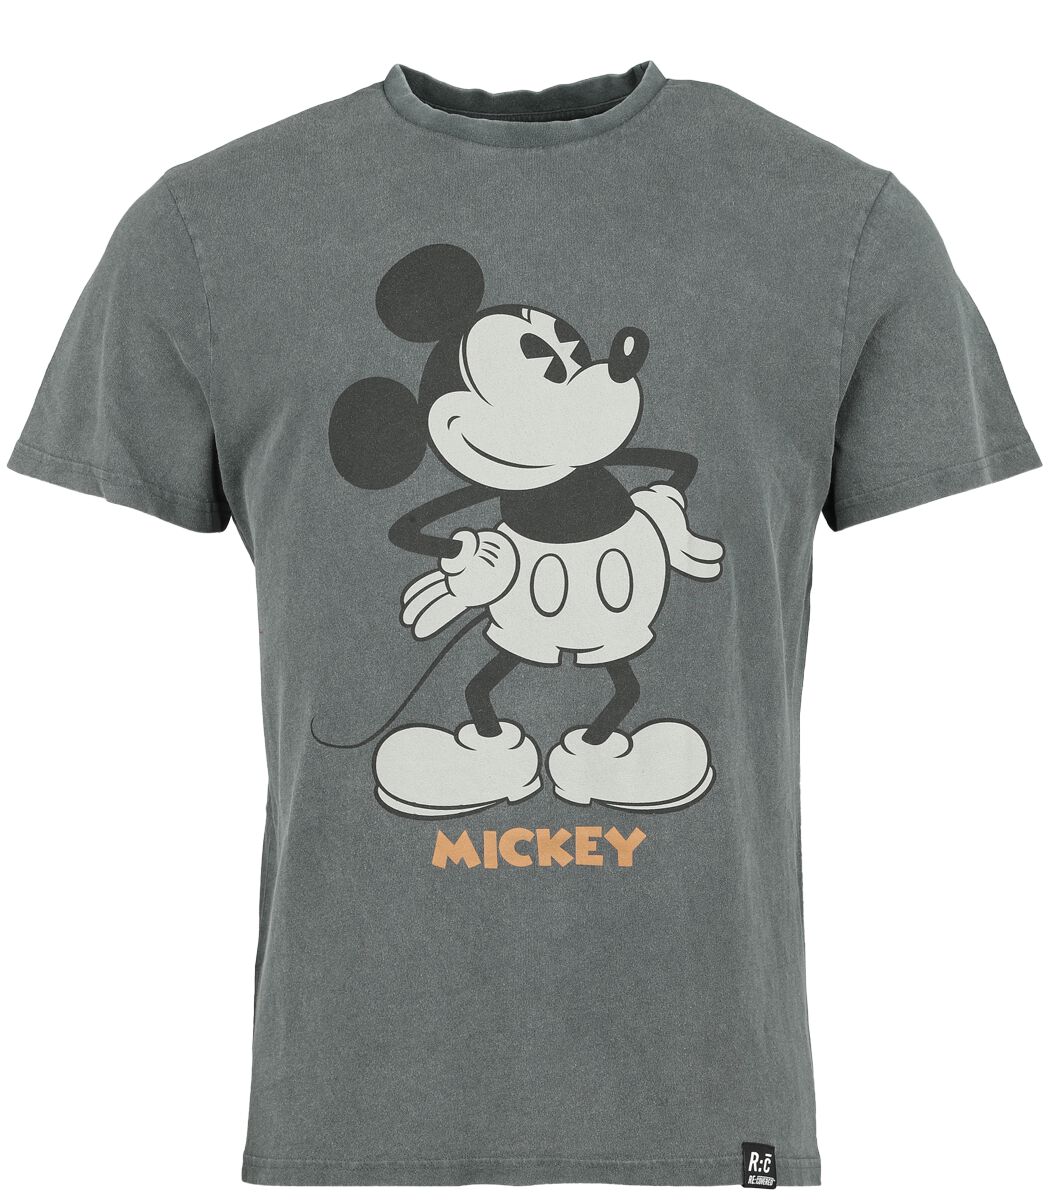 Mickey Mouse Recovered - Disney - Mickey Mouse Vintage T-Shirt multicolour